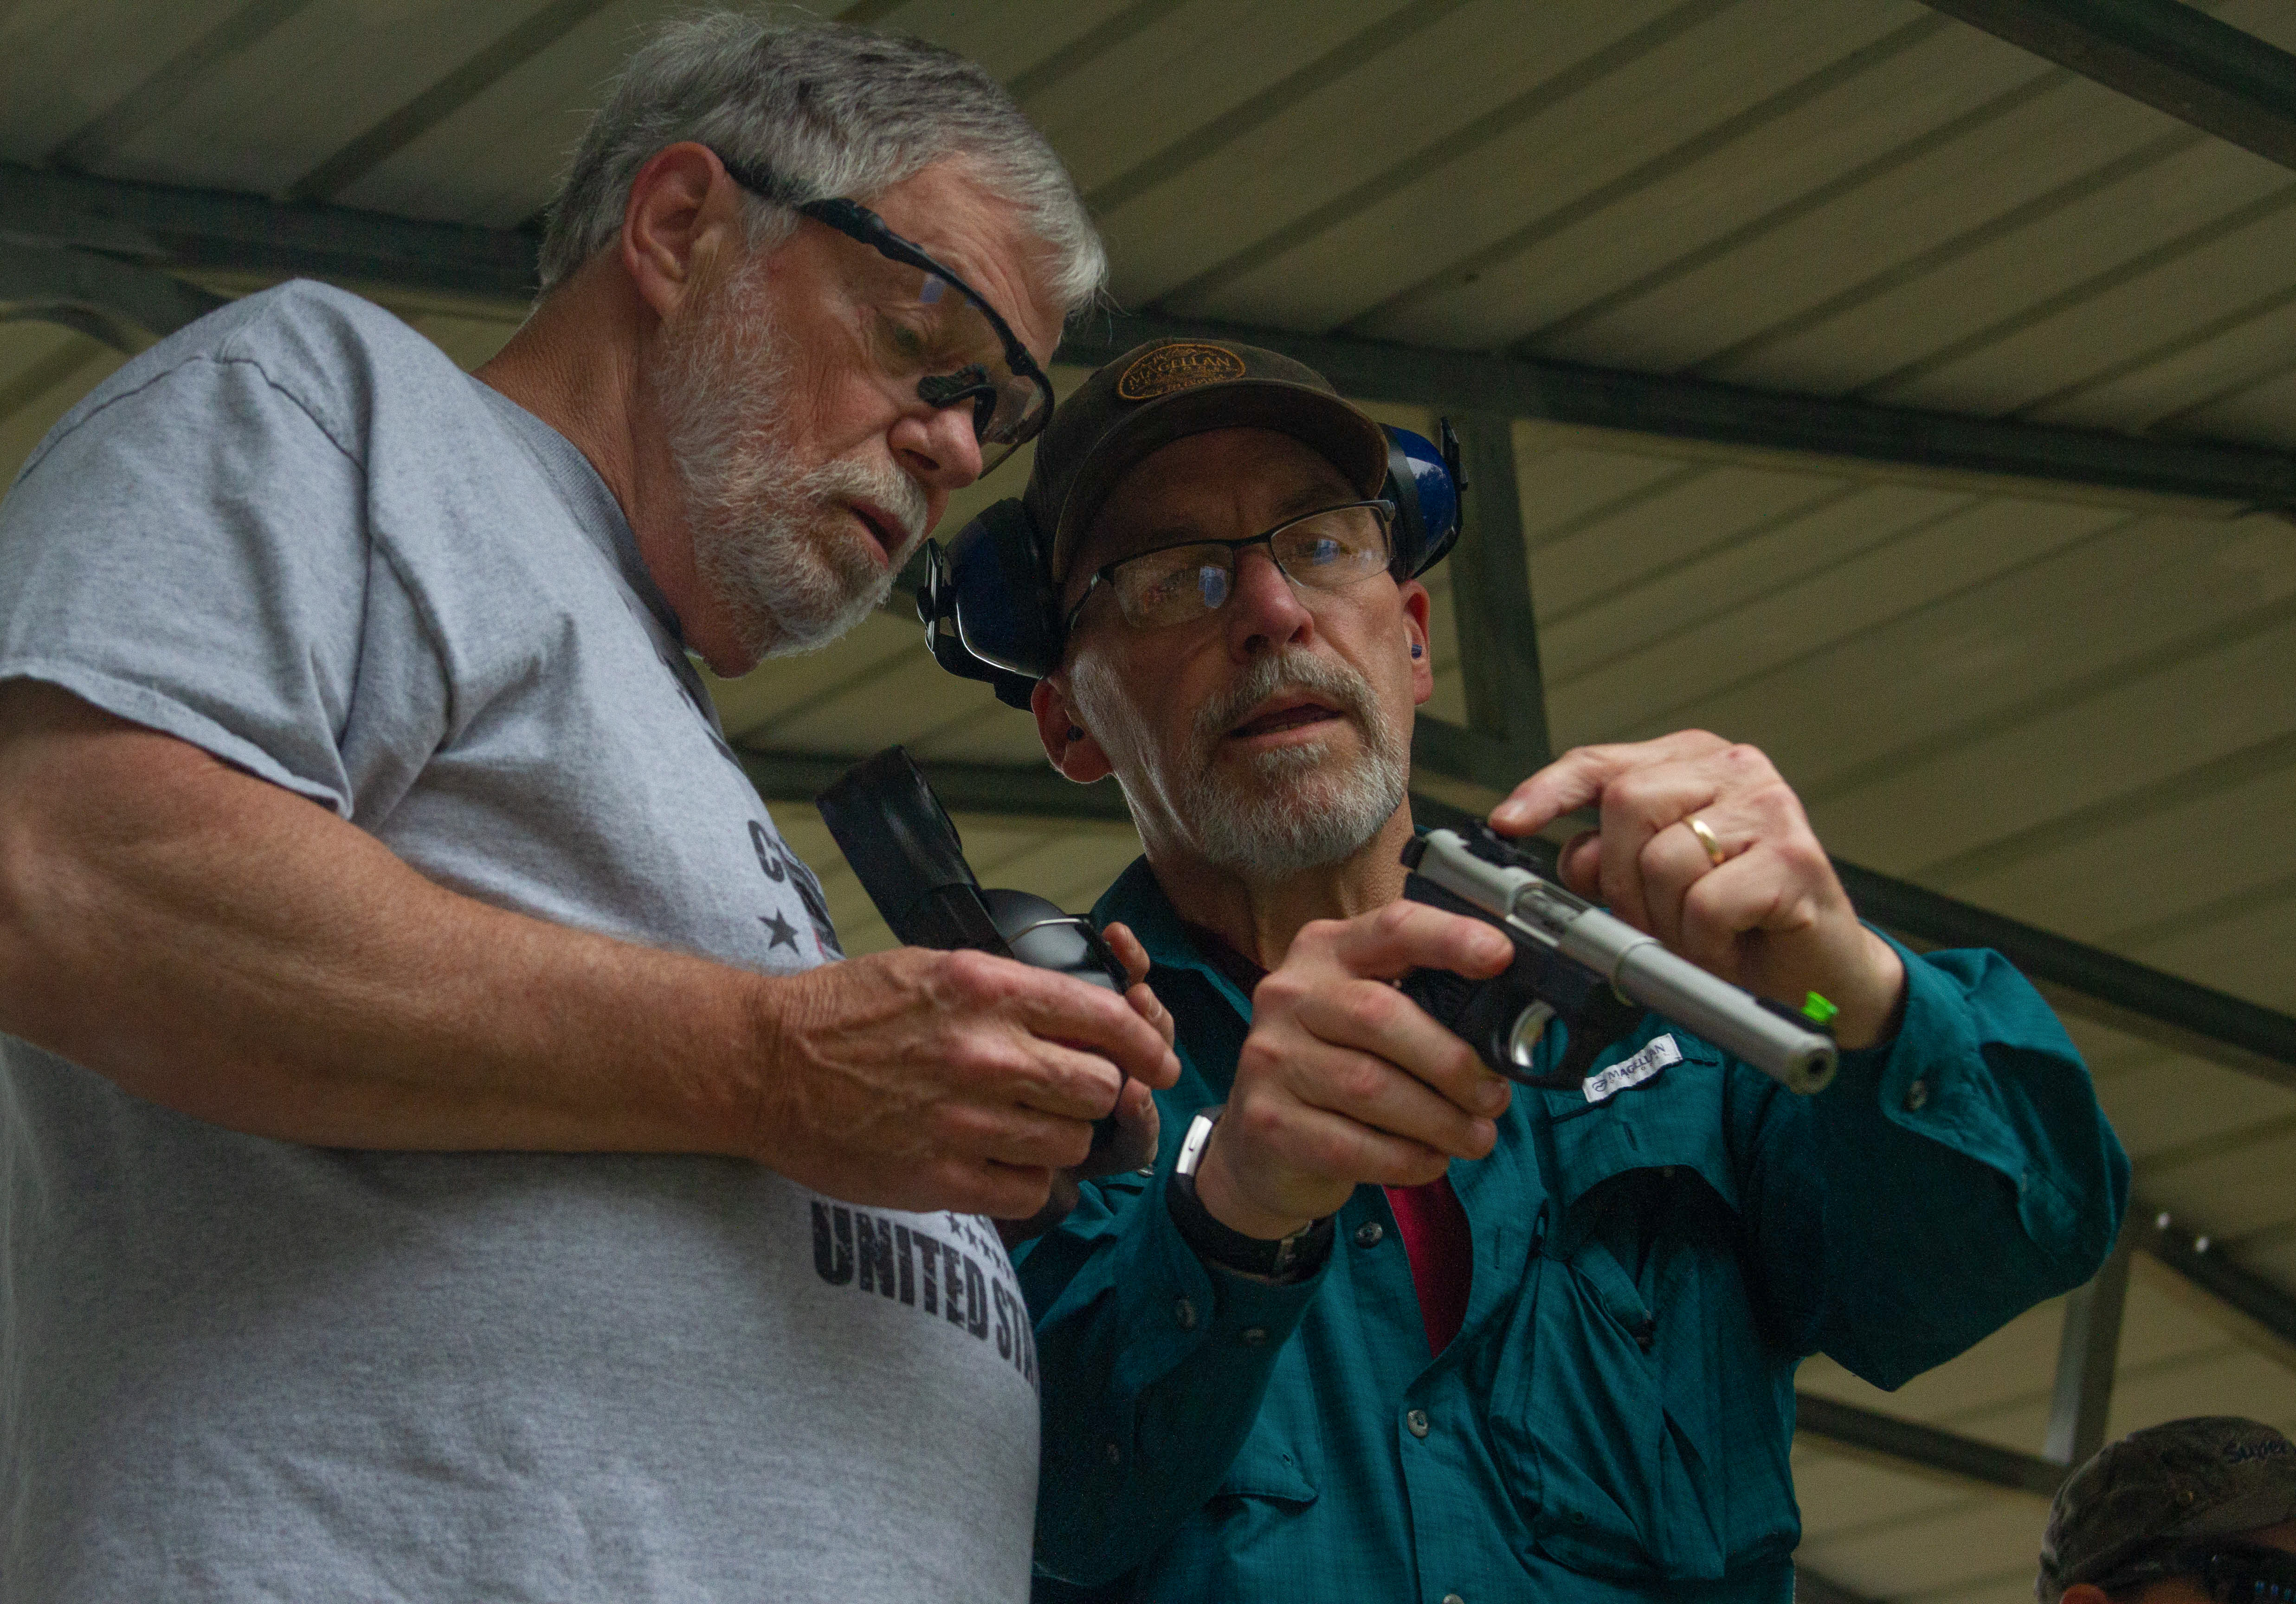 Richard Miller shows Alamance resident Tom Shanklin how to properly place his hands on a handgun during a concealed carry class on Sept. 14, 2019. Photo by Anton L. Delgado | Elon News Network